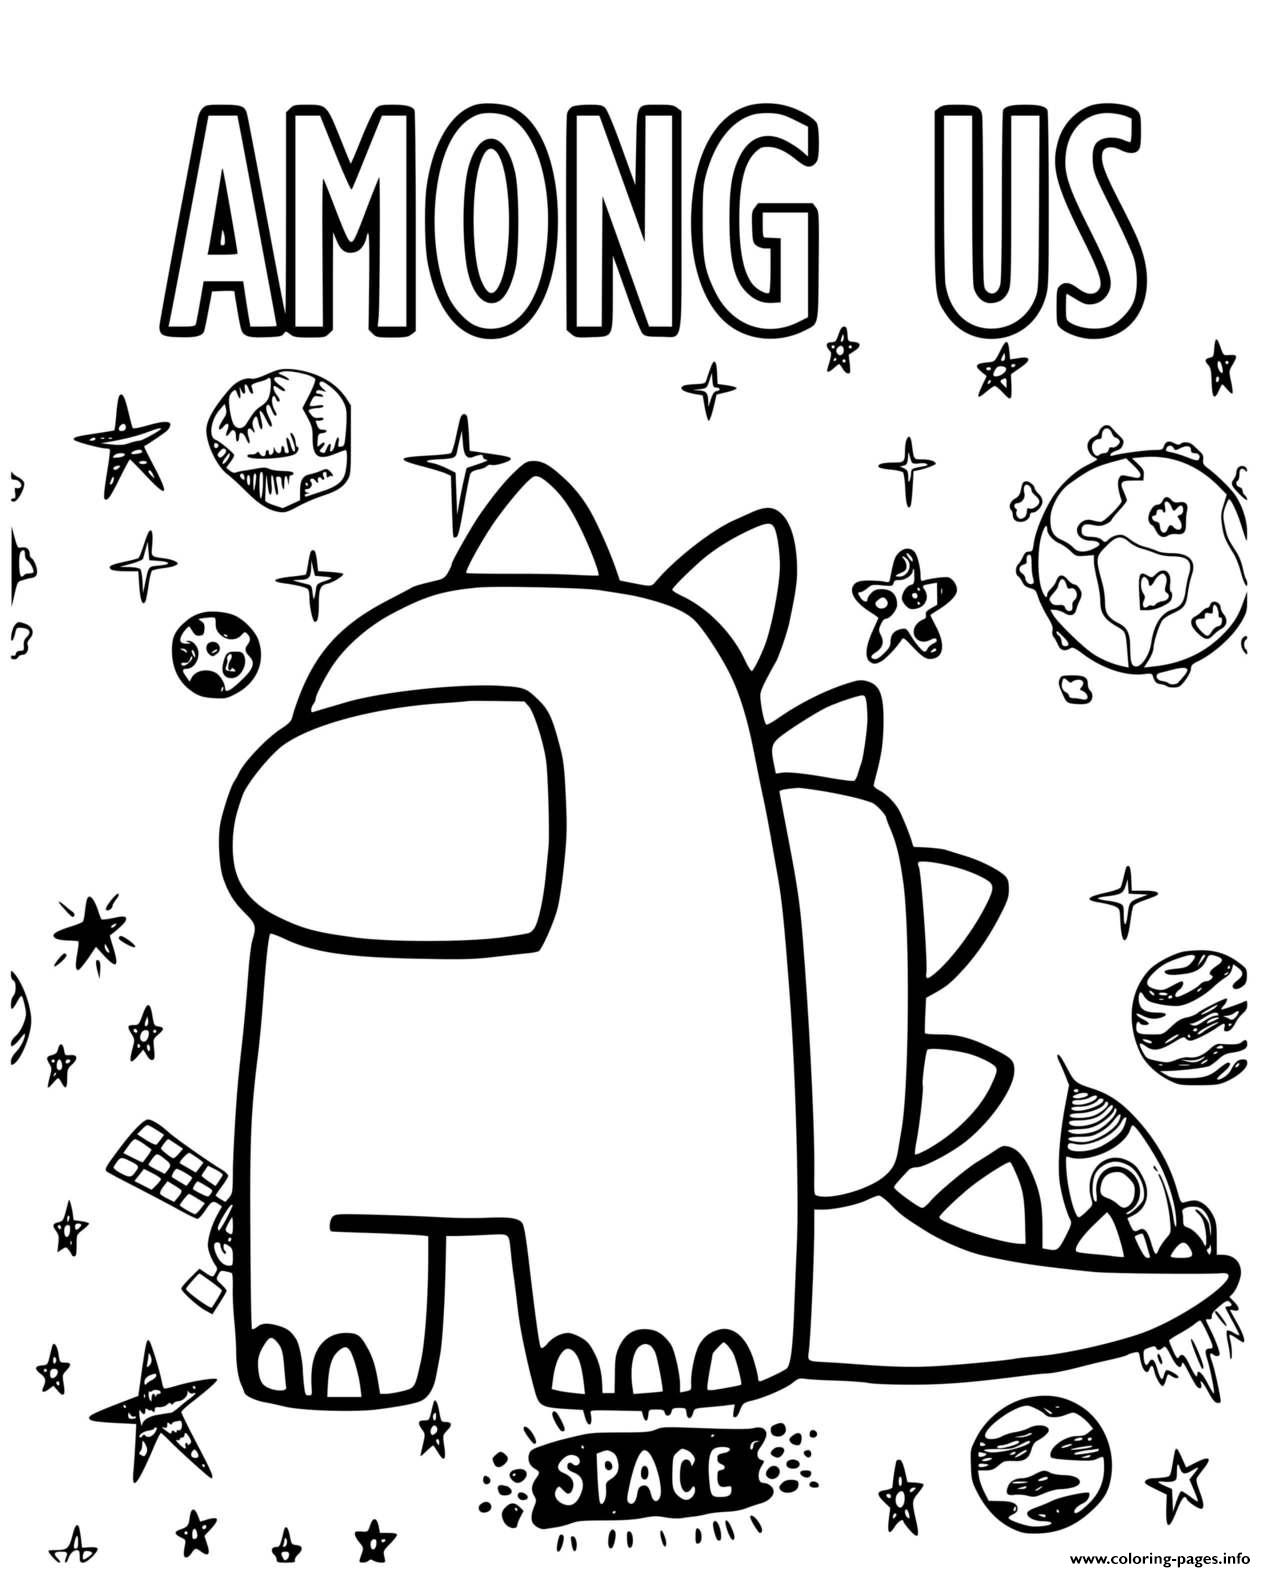 among-us-dinosaur-coloring-pages